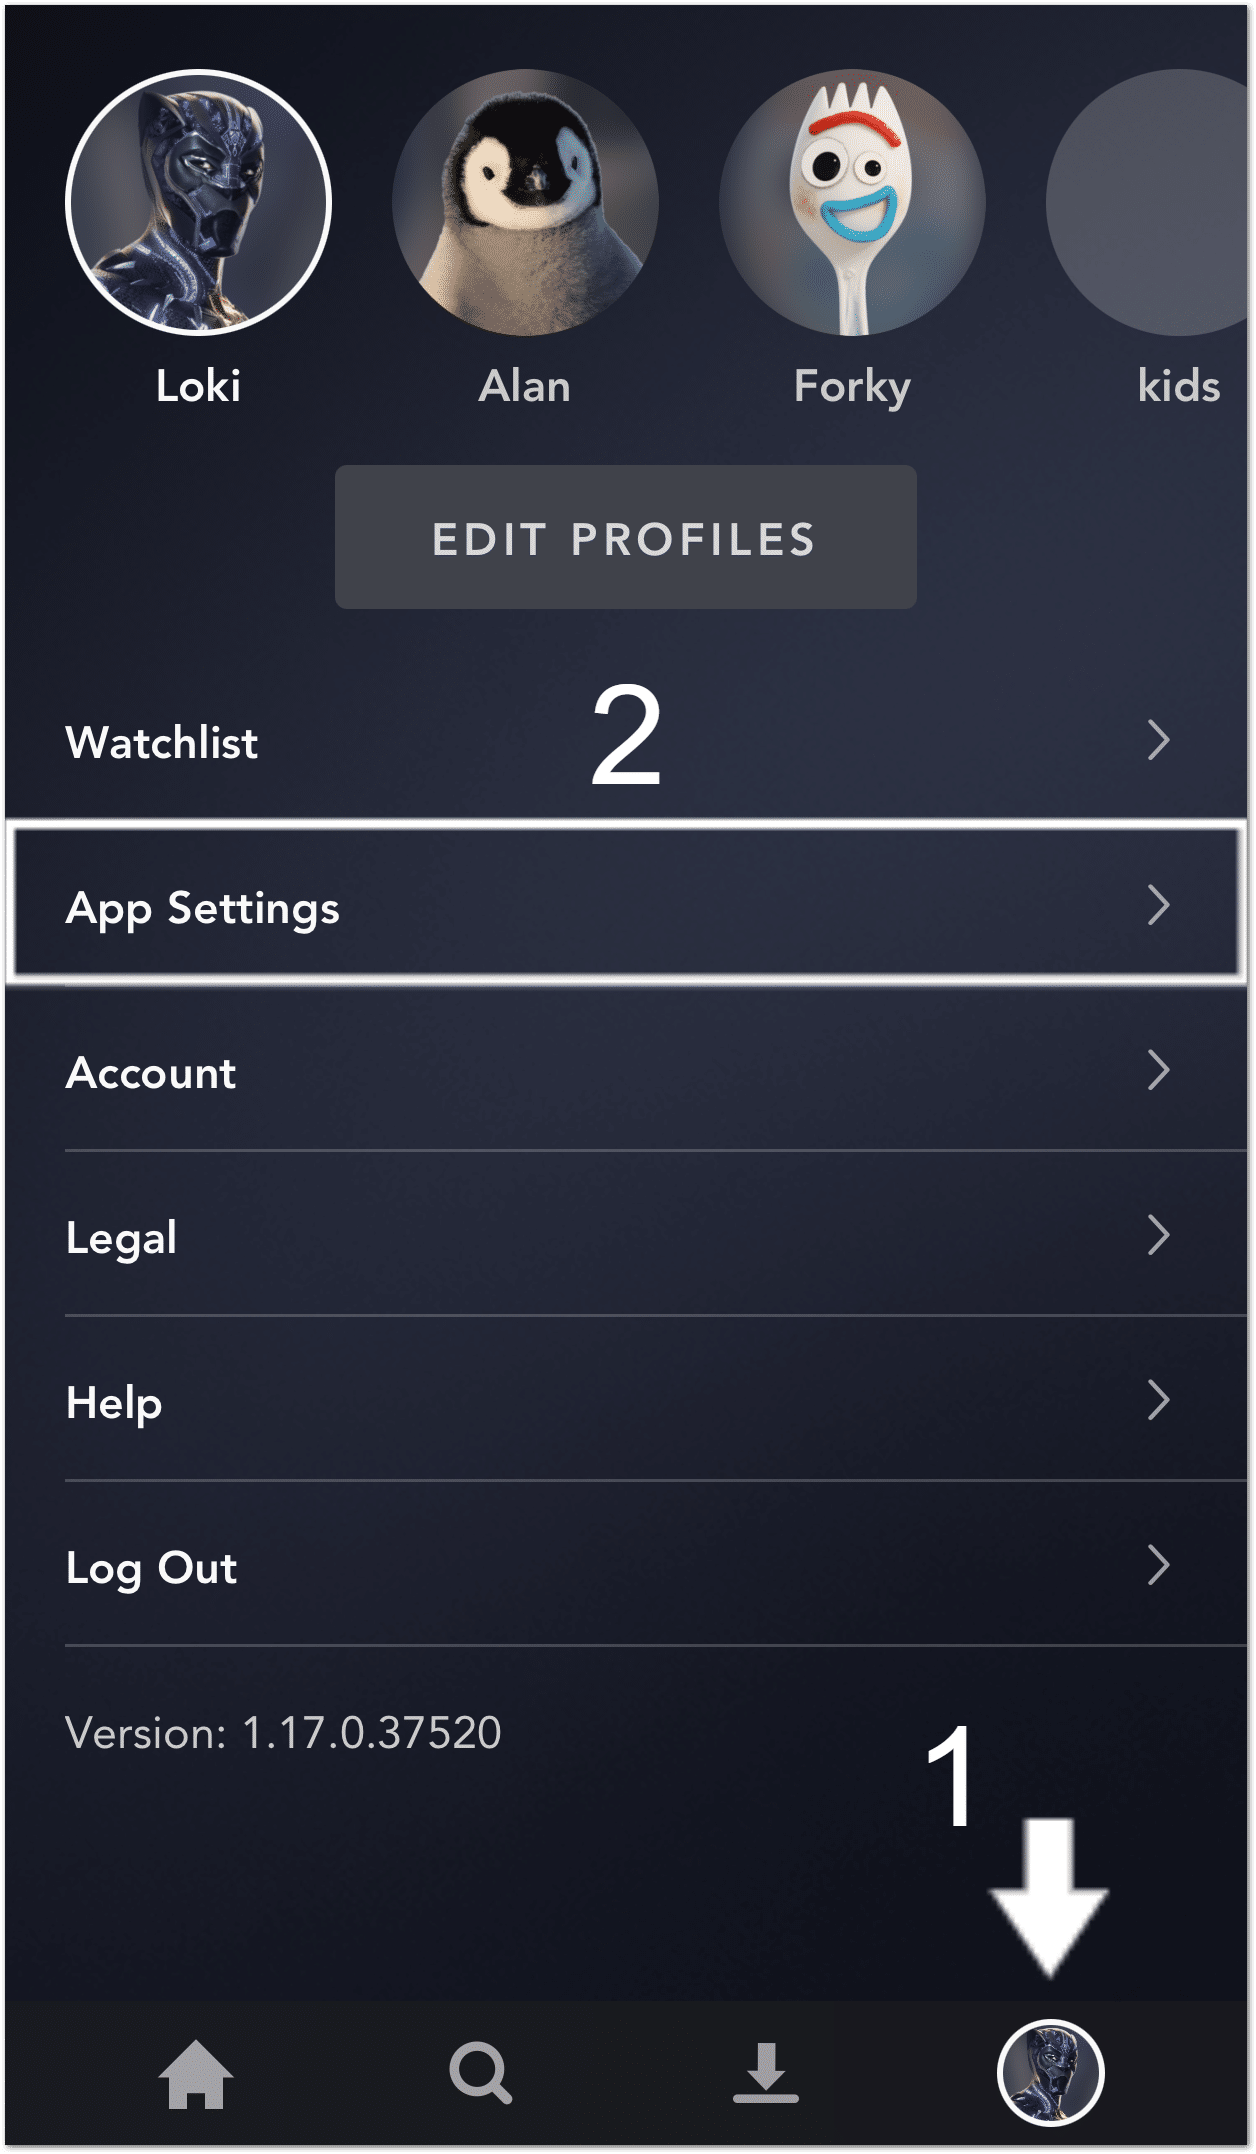 access settings menu through Disney Plus mobile app to lower streaming quality and fix not loading, playing or something went wrong